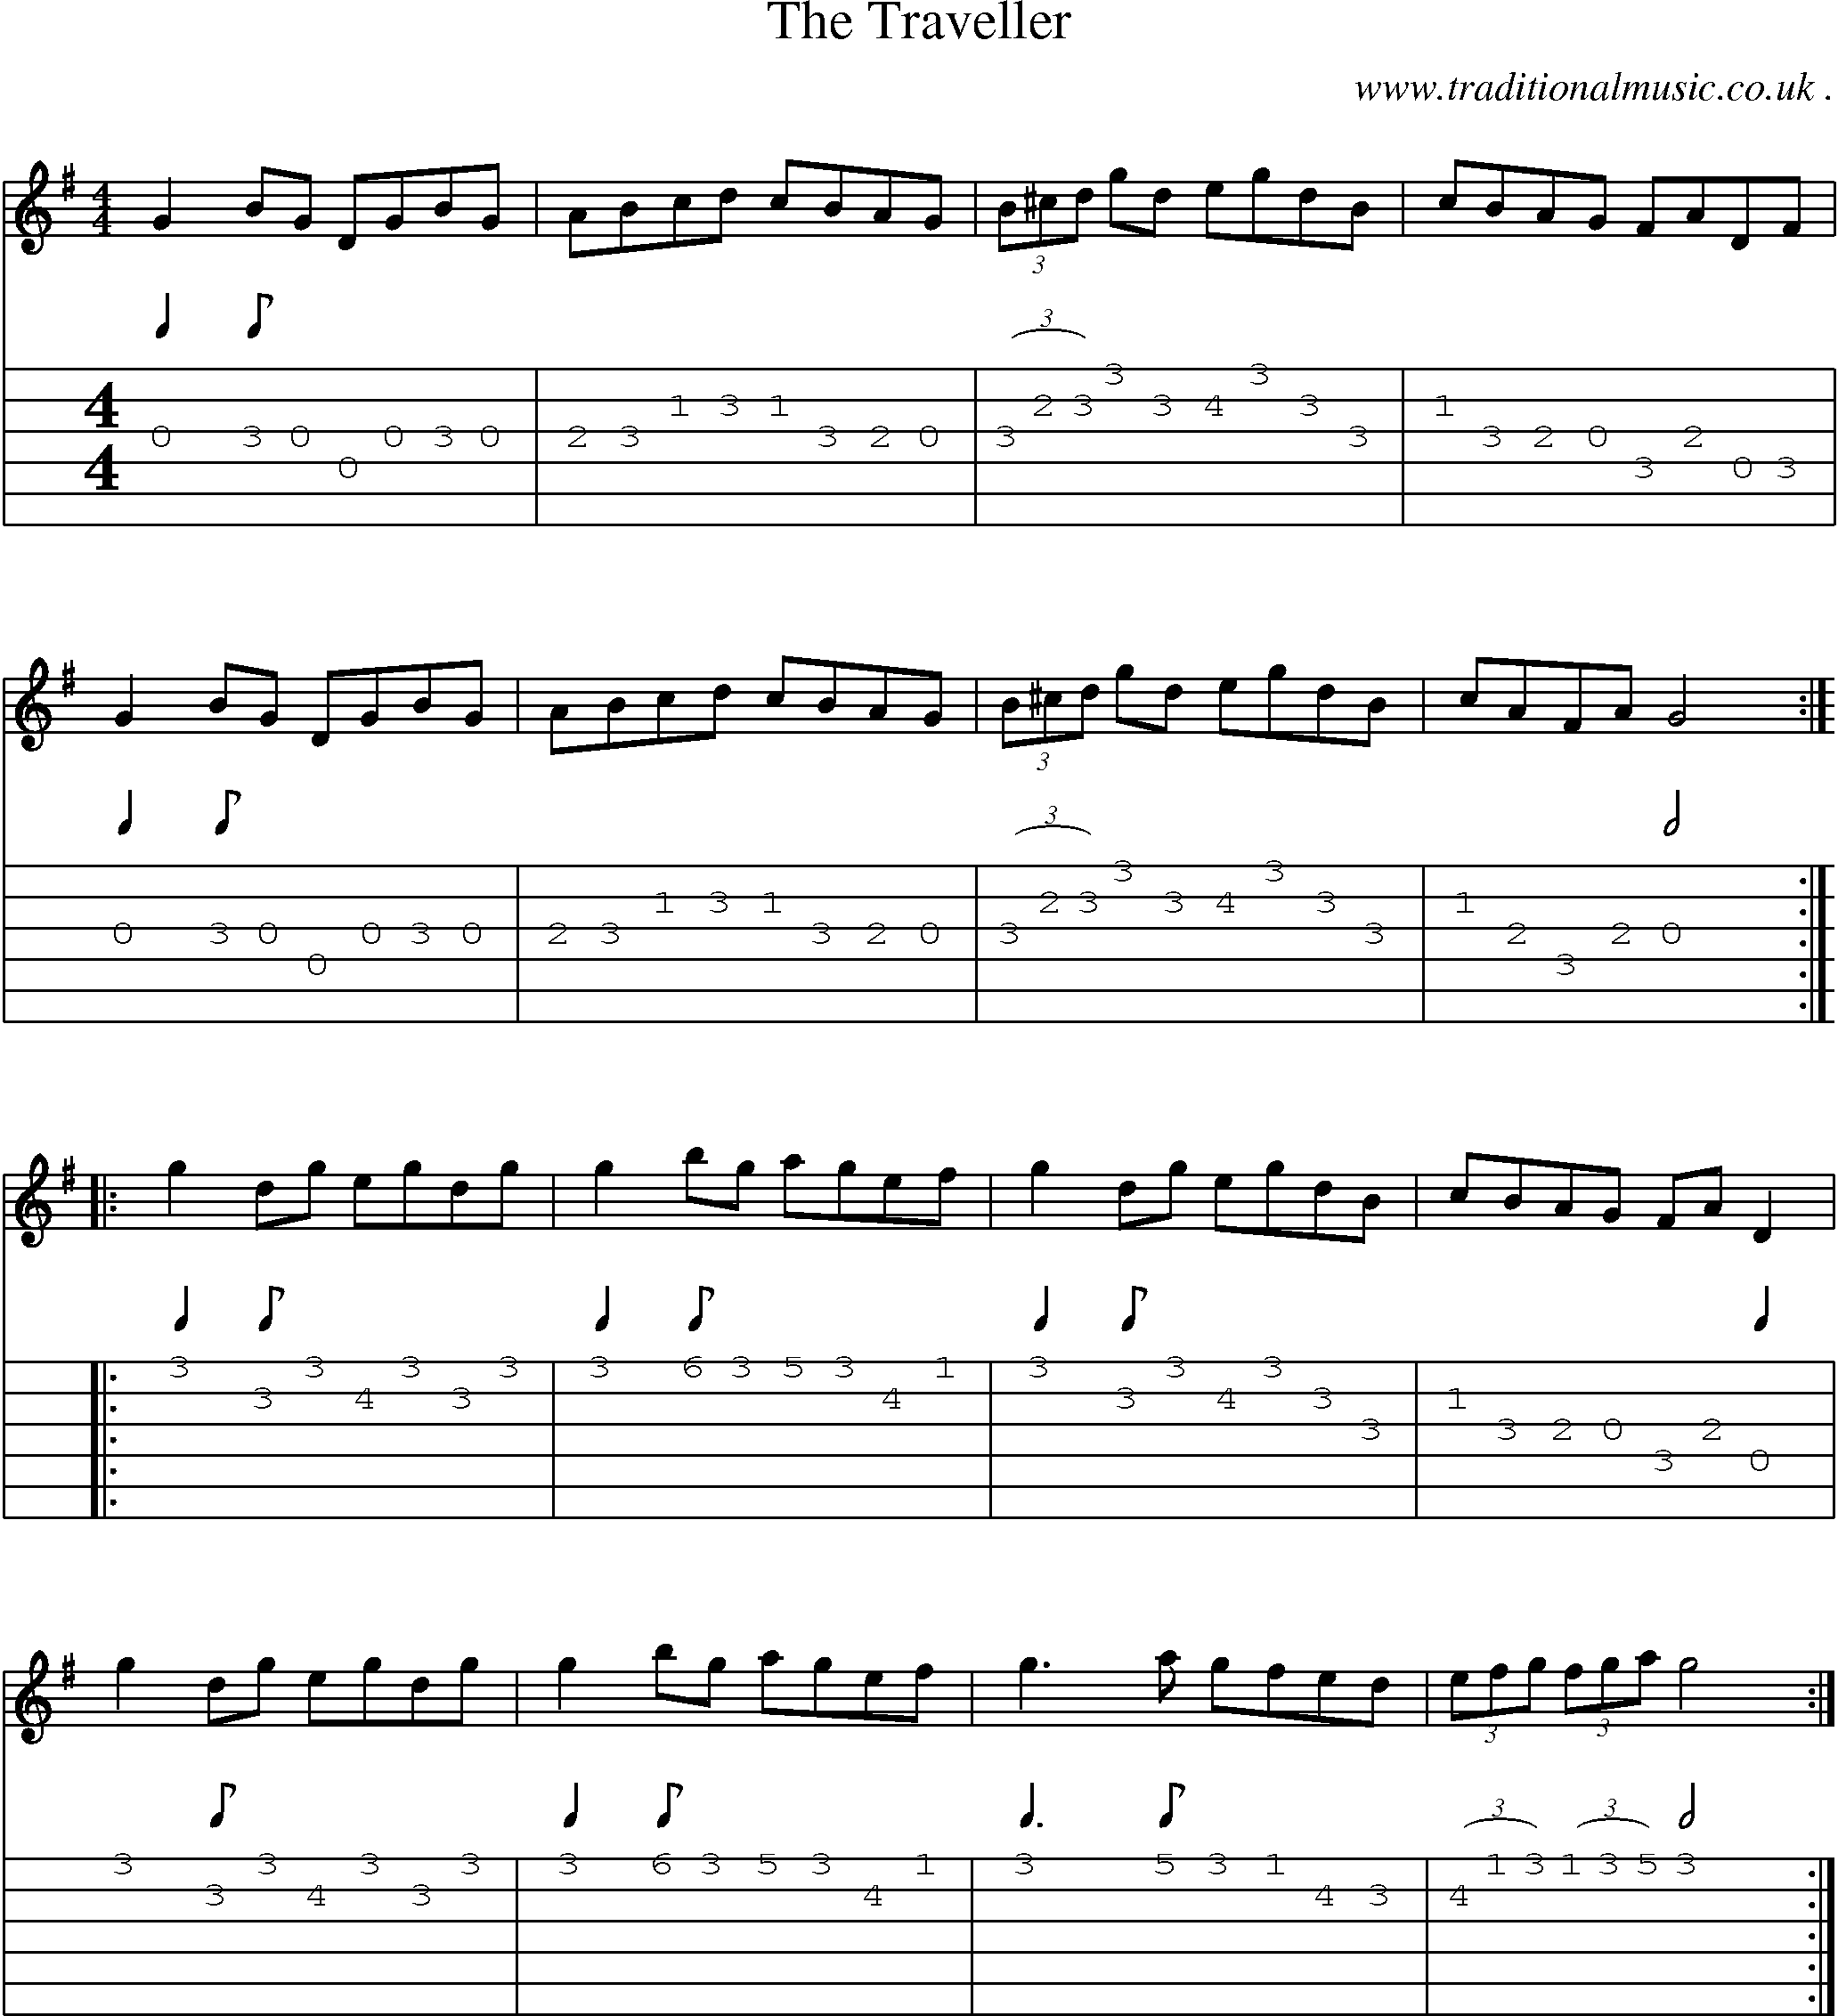 Sheet-Music and Guitar Tabs for The Traveller